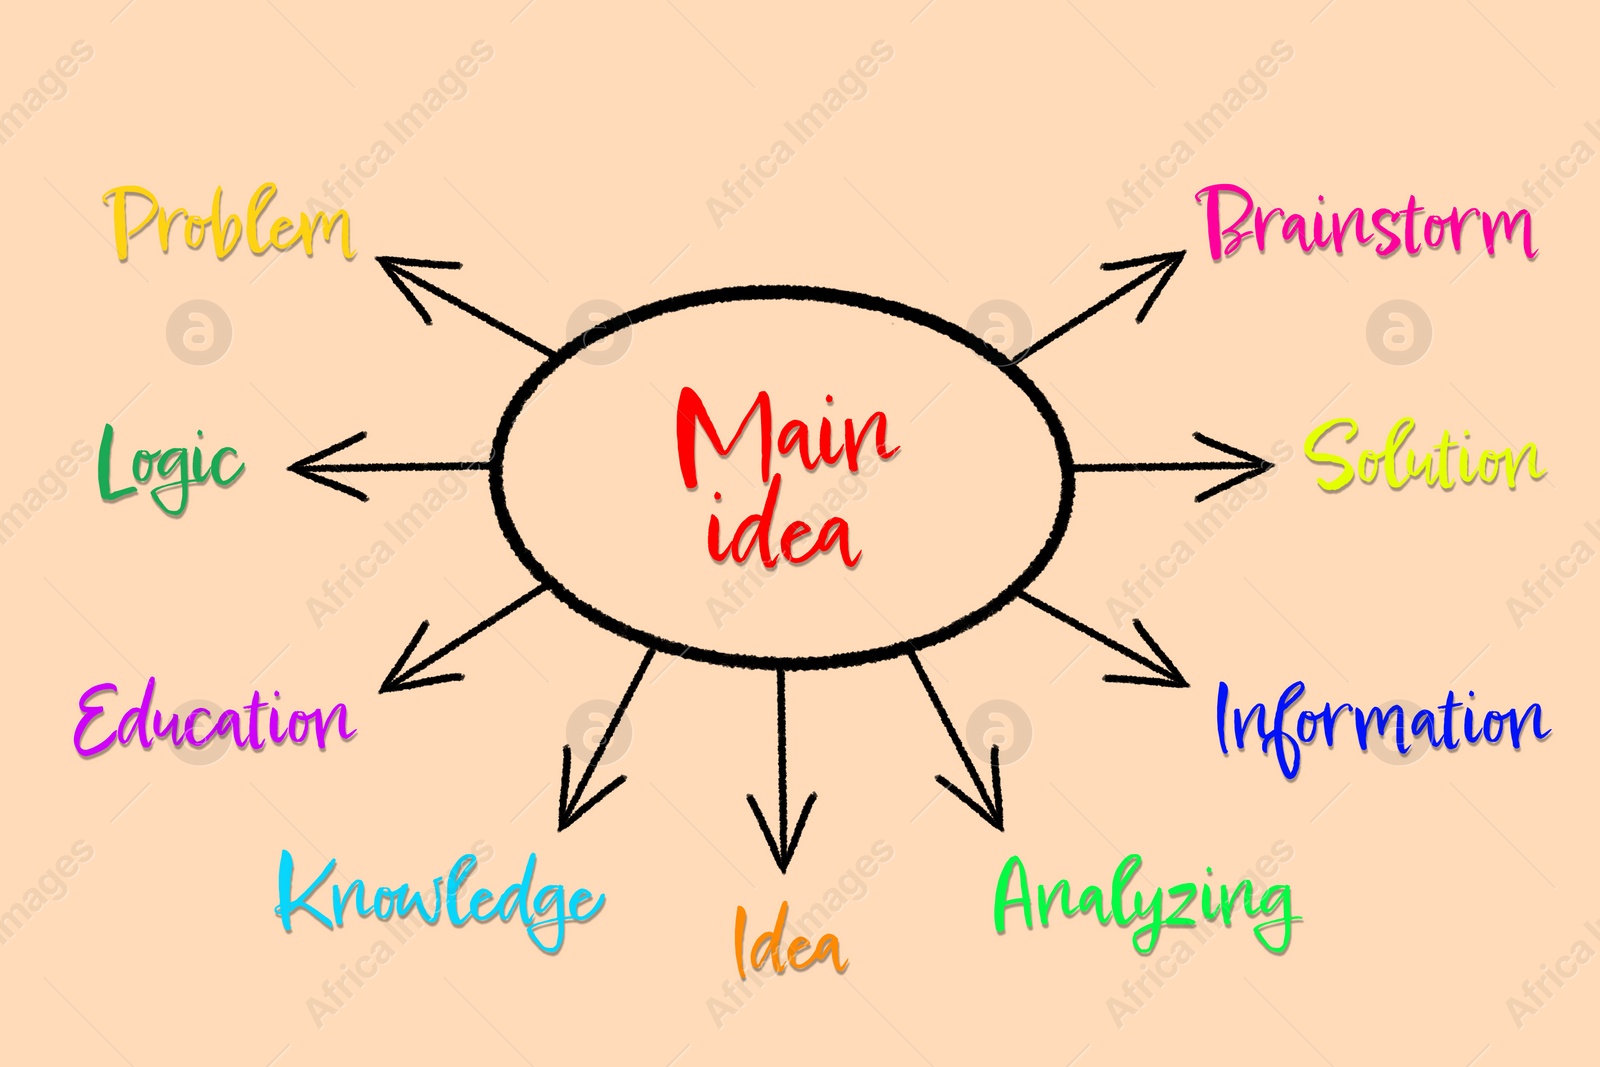 Illustration of Mind map. Circle with words Main Idea and arrows leading to other words (Problem, Logic, Education, Knowledge, Idea, Analyzing, Information, Solution, Brainstorm) on beige background